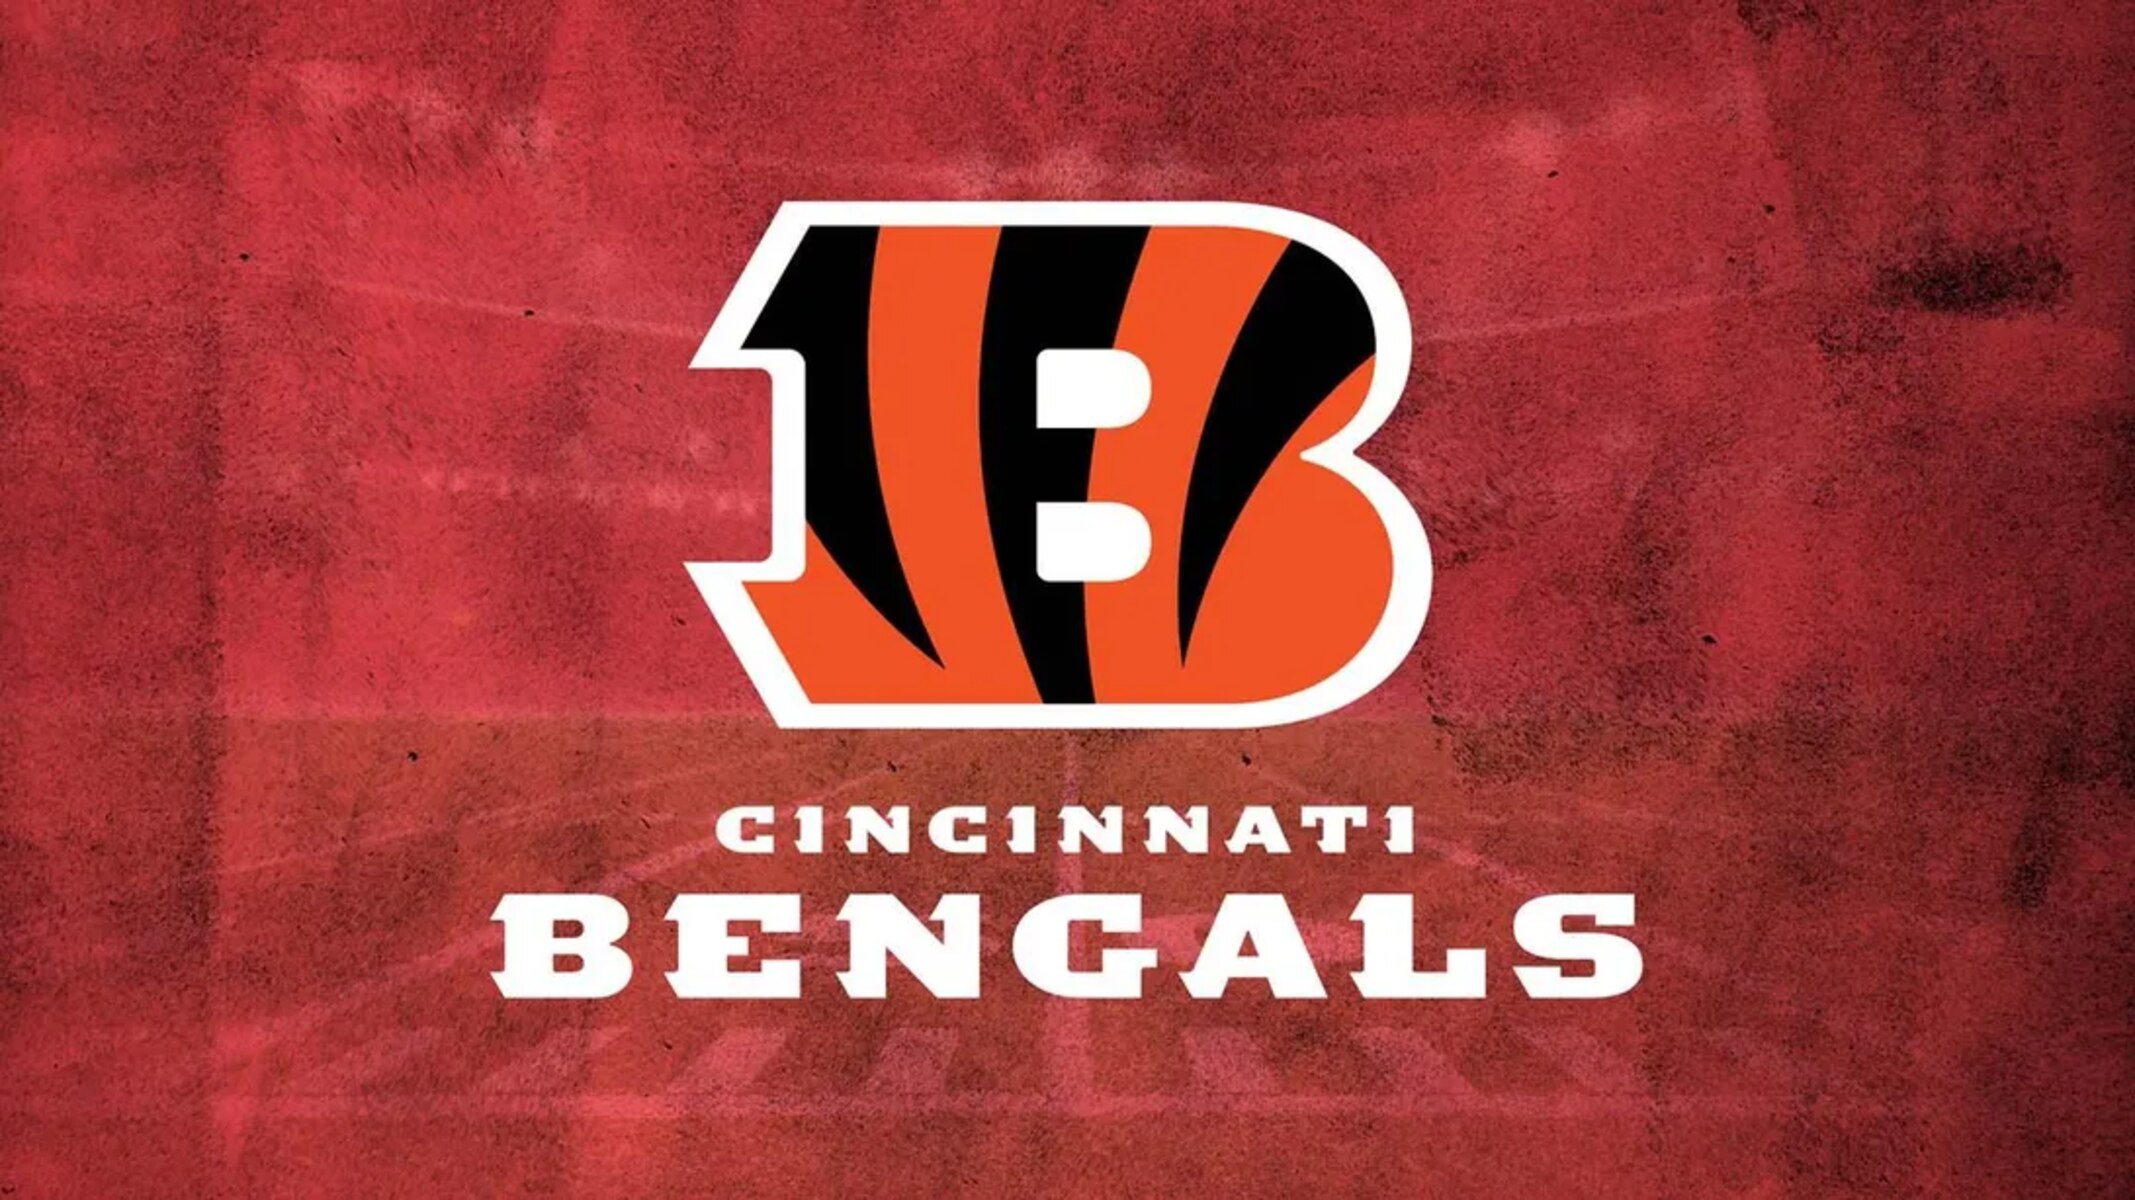 How To Watch The Bengals Game